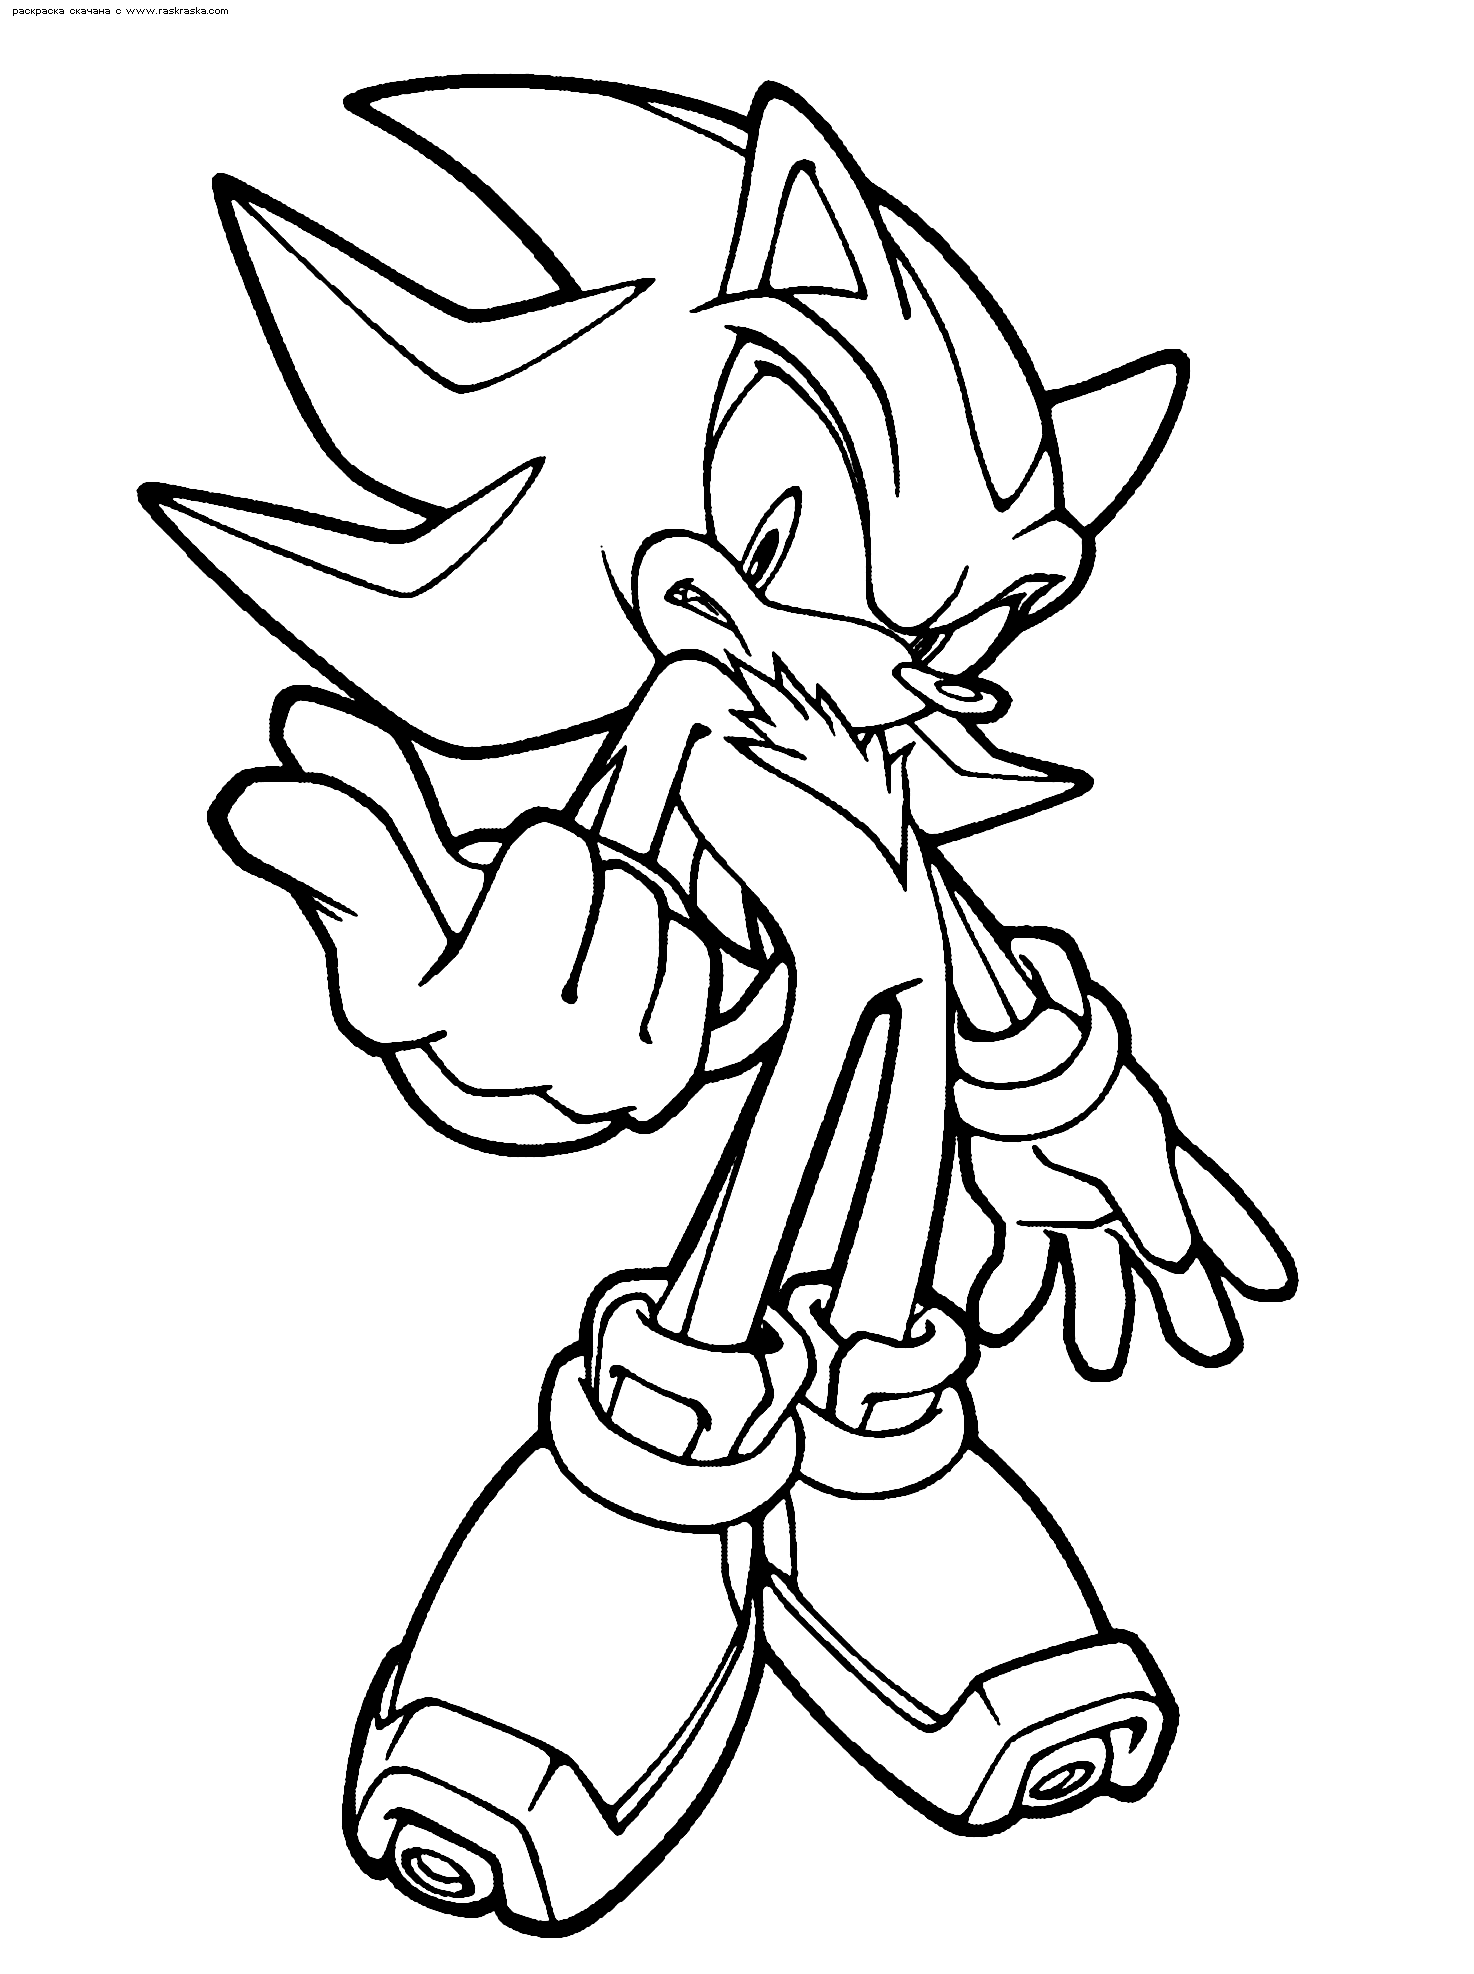 super sonic coloring page super sonic coloring pages to download and print for free sonic super coloring page 